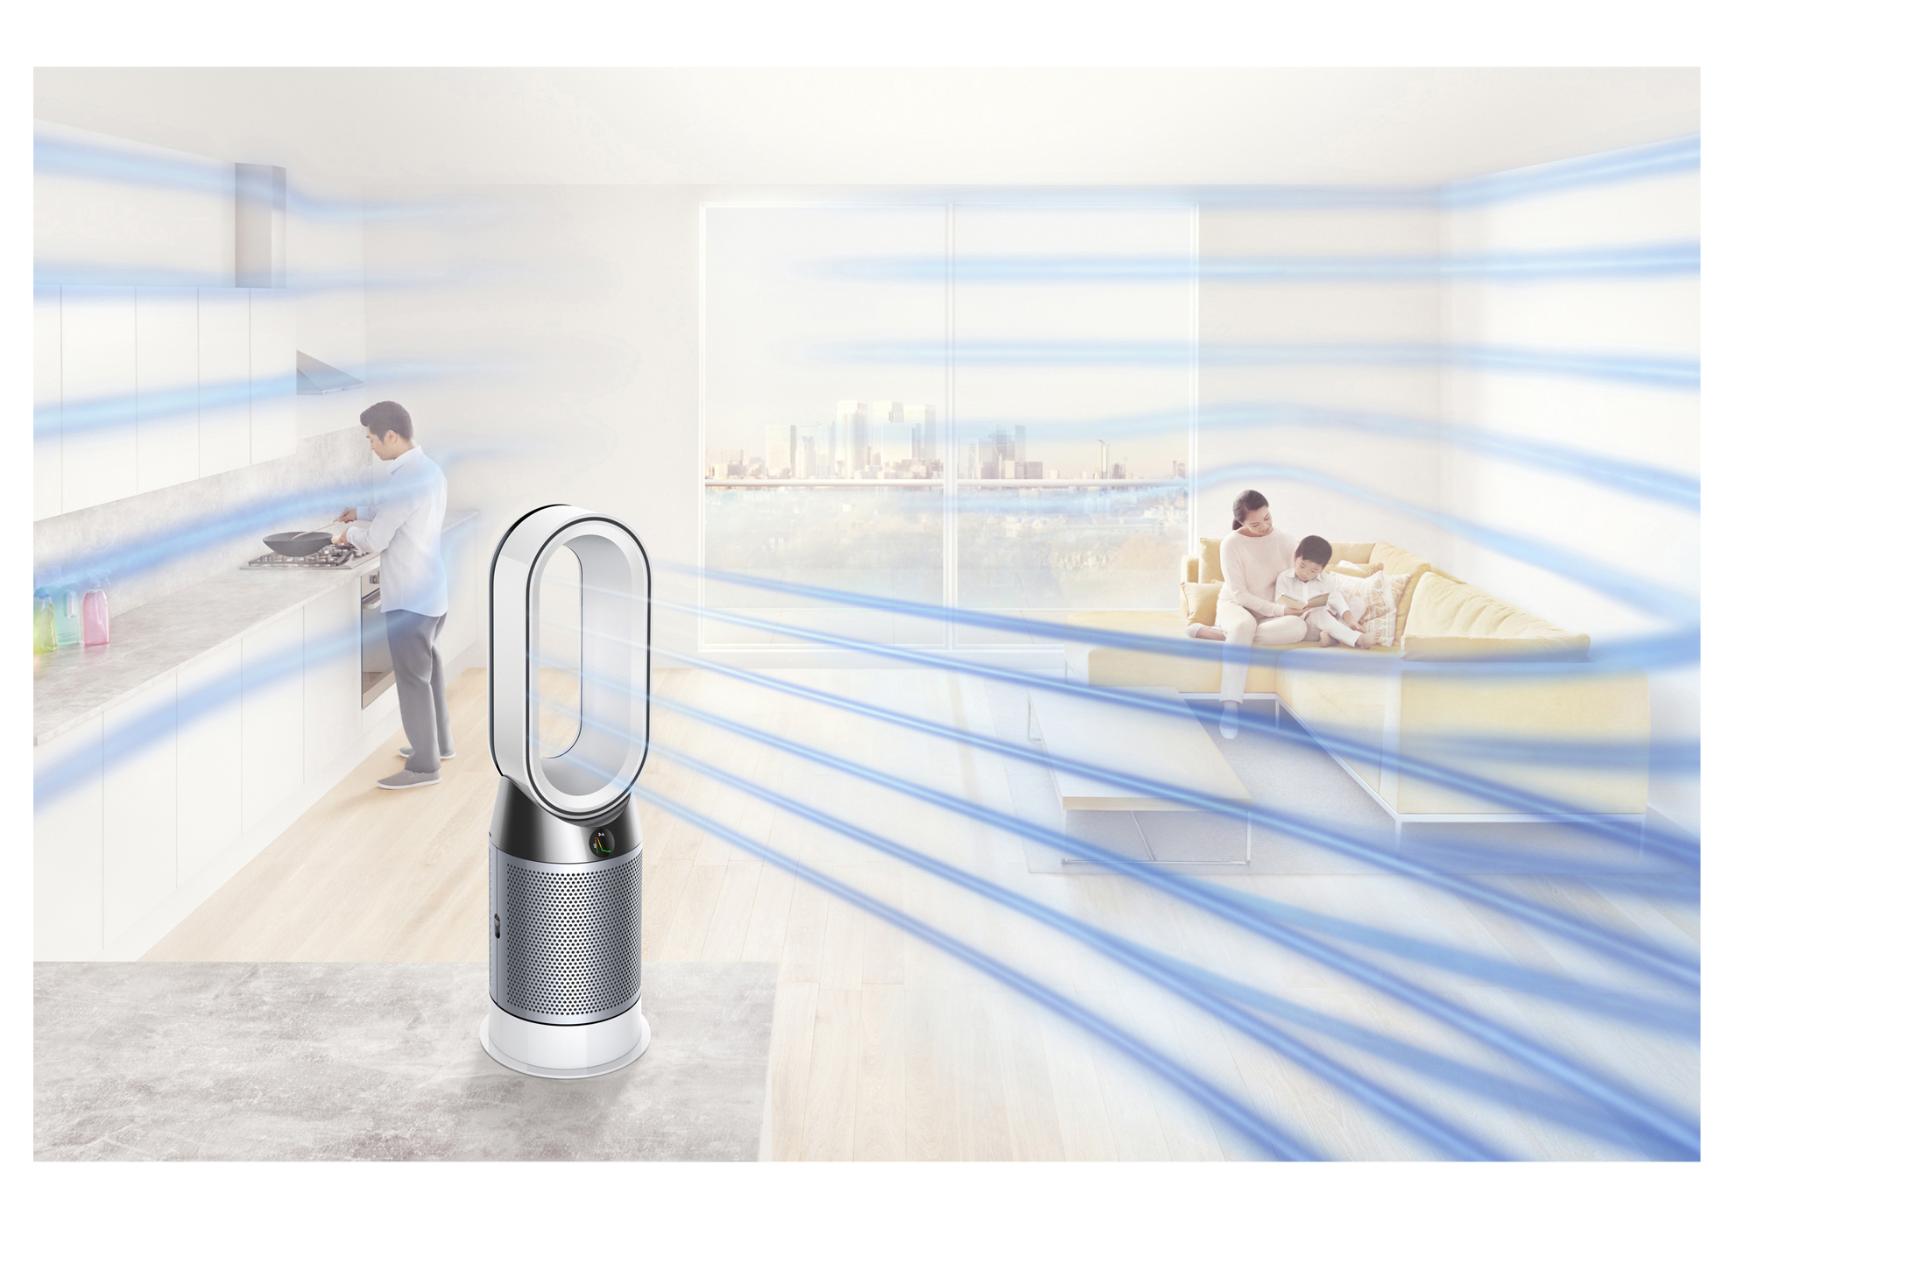 Dyson Pure Hot+Cool purifier in action